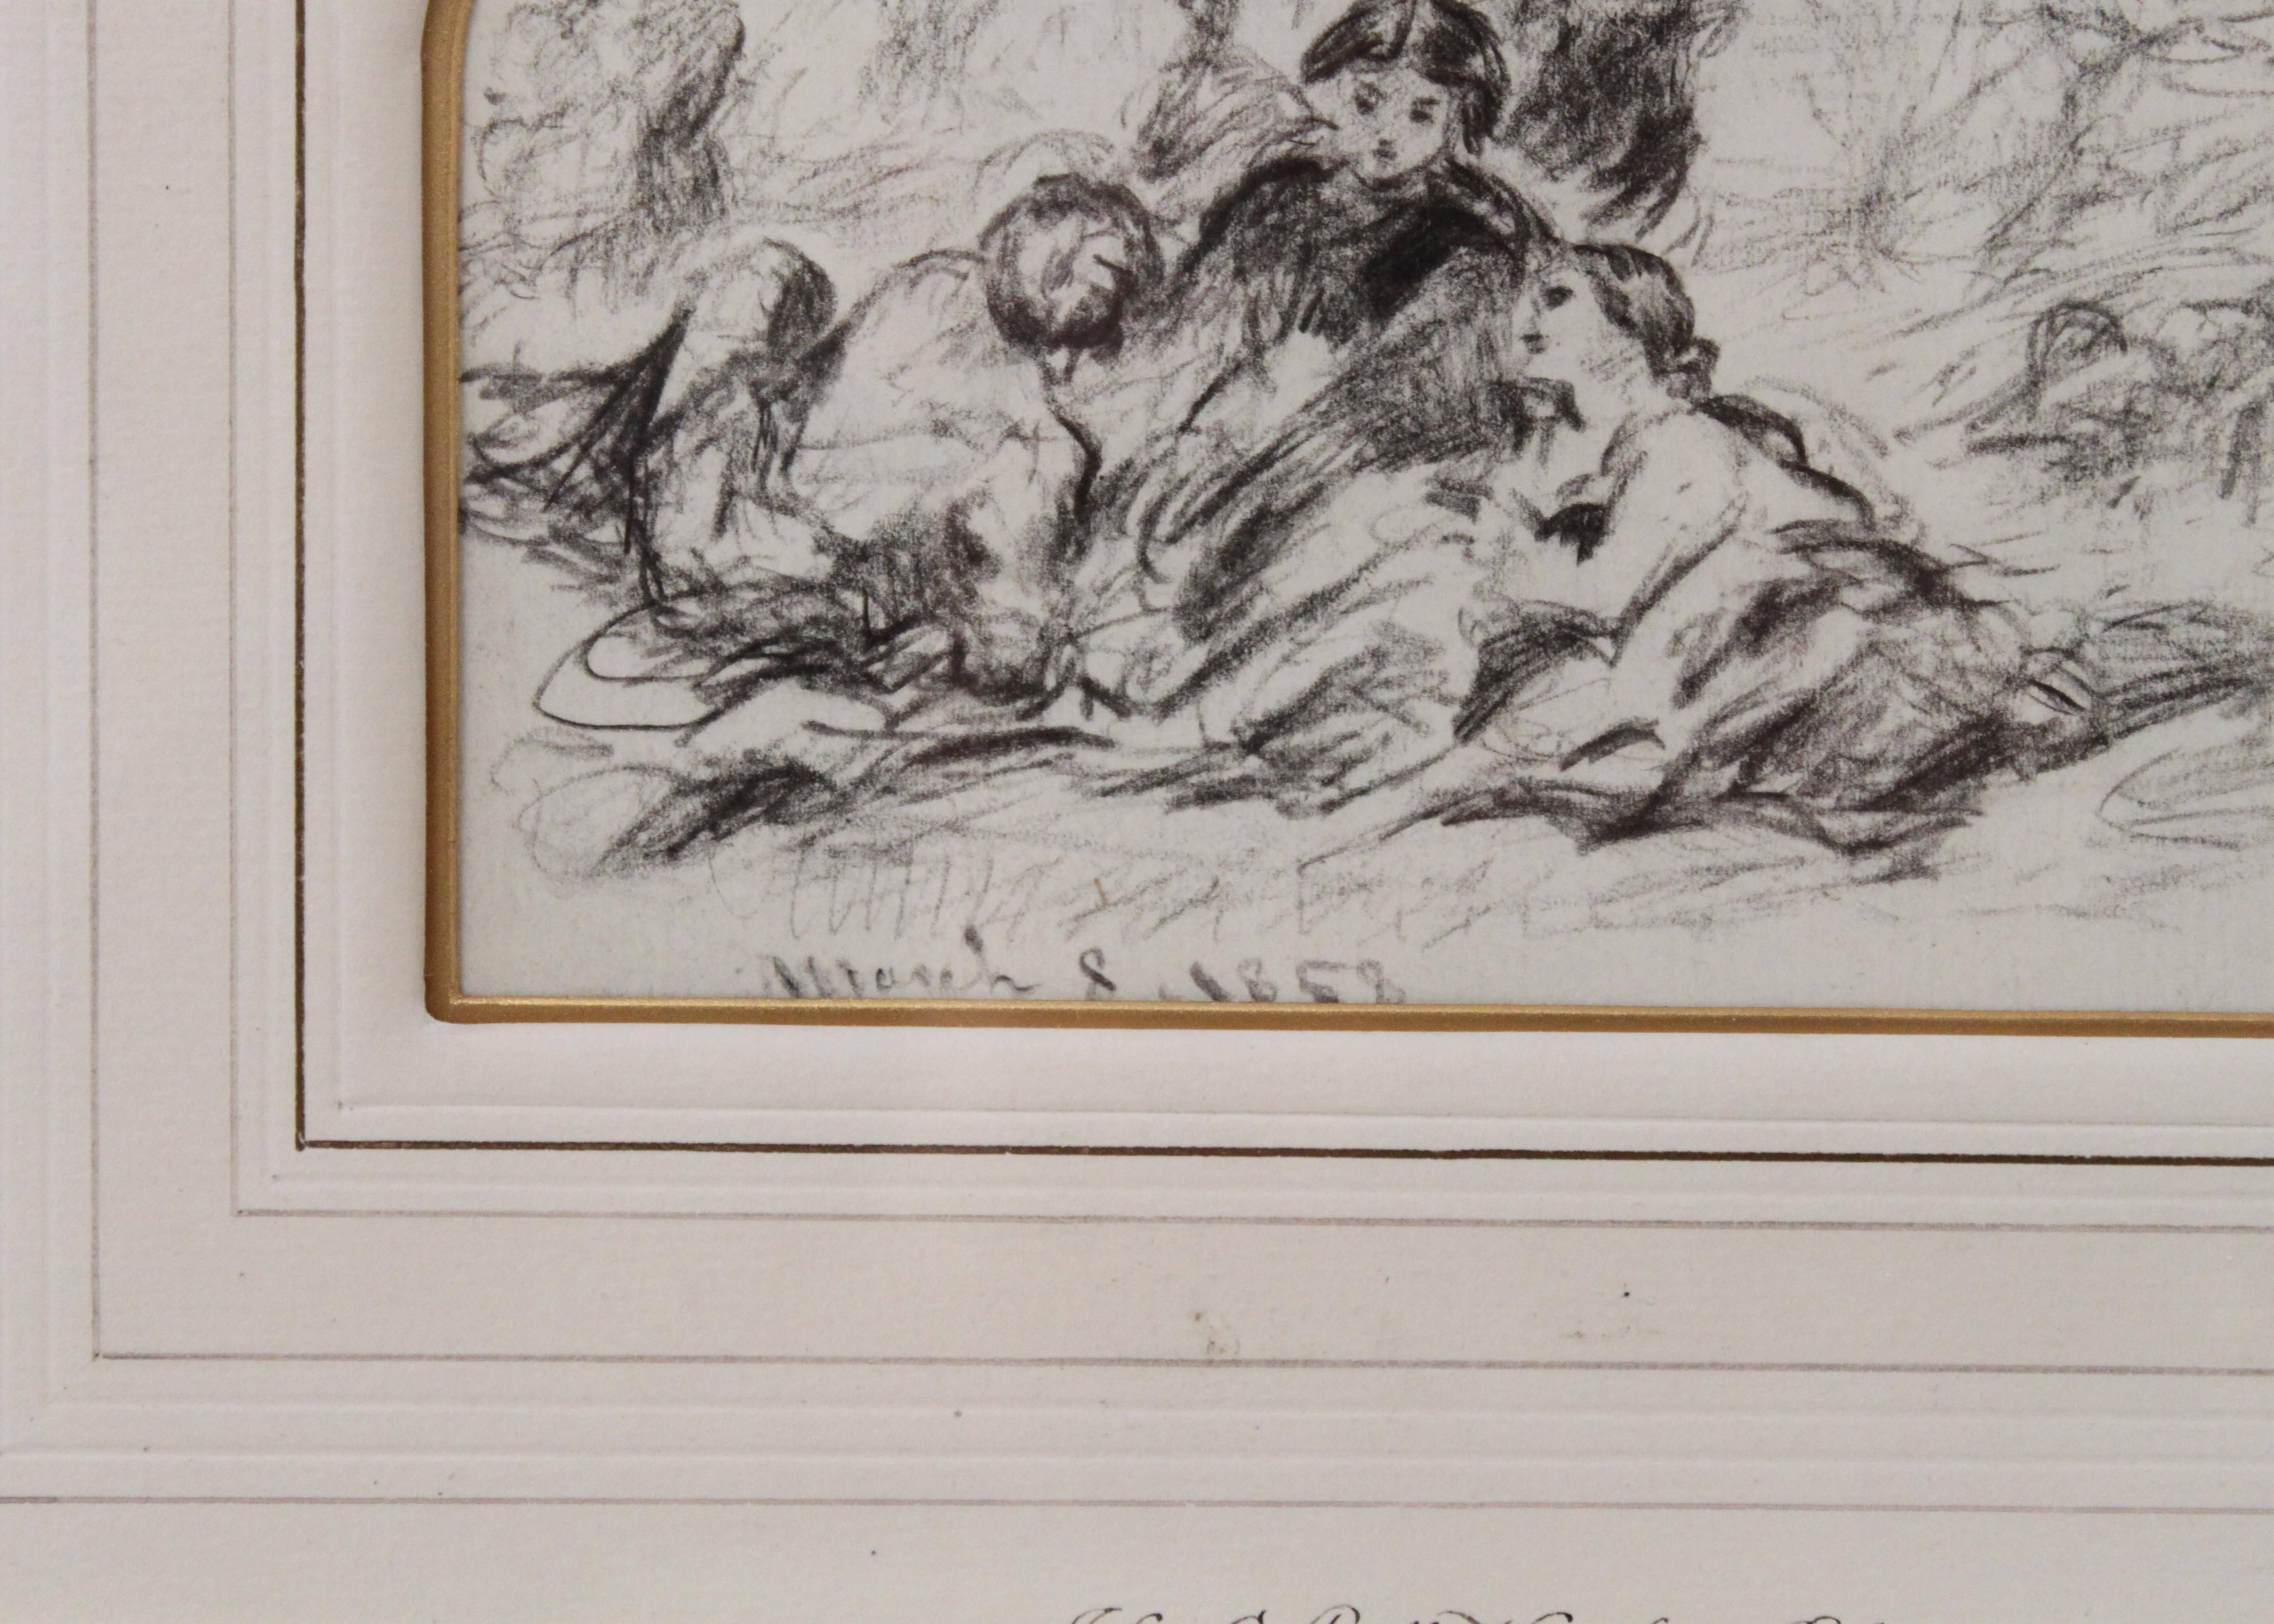 Set of two original drawings by John Callcott Horsley, R.A. (January 29th, 1817 - October 18th, 1903), an English Academic painter and illustrator of historical scenes and best known for designing the first Christmas card for Henry Cole in 1857.